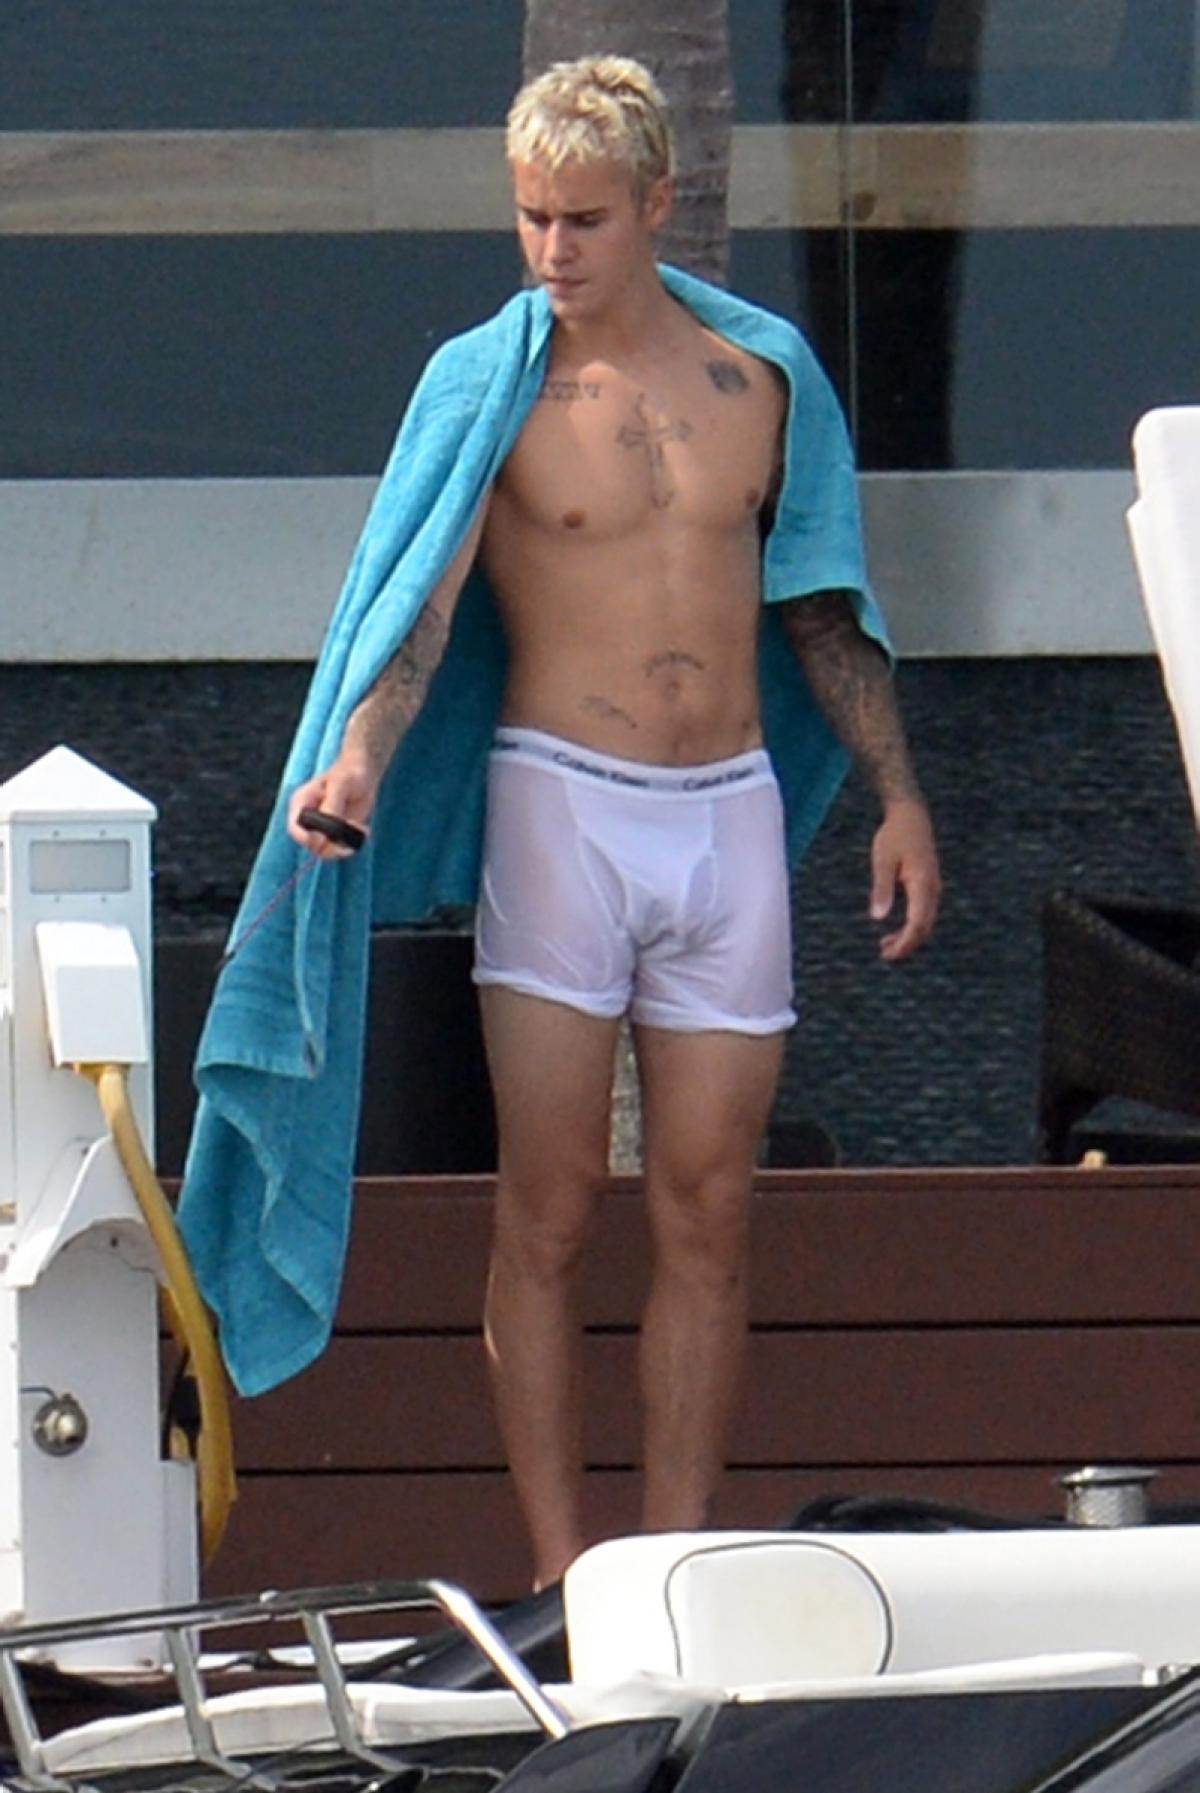 Justin Bieber Is Too Rude, His Twink Body Is Perfect